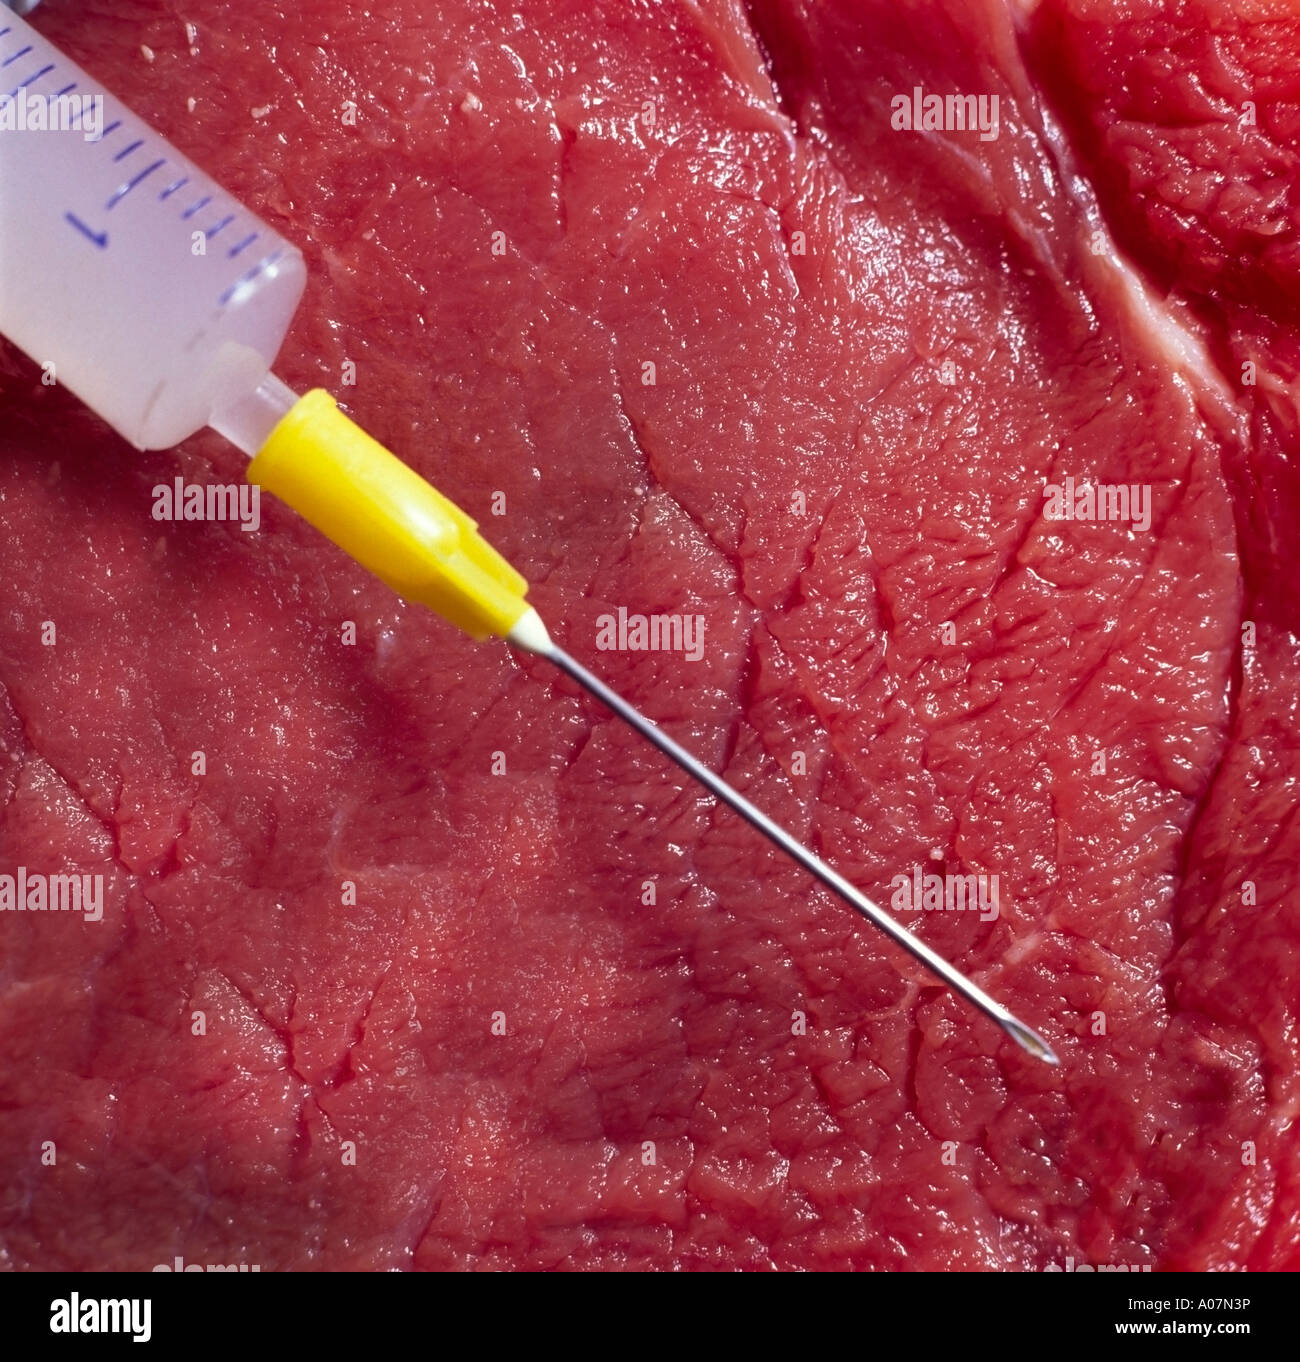 close up of meat beef with a syringe jab shot in front of the piece of meat Stock Photo